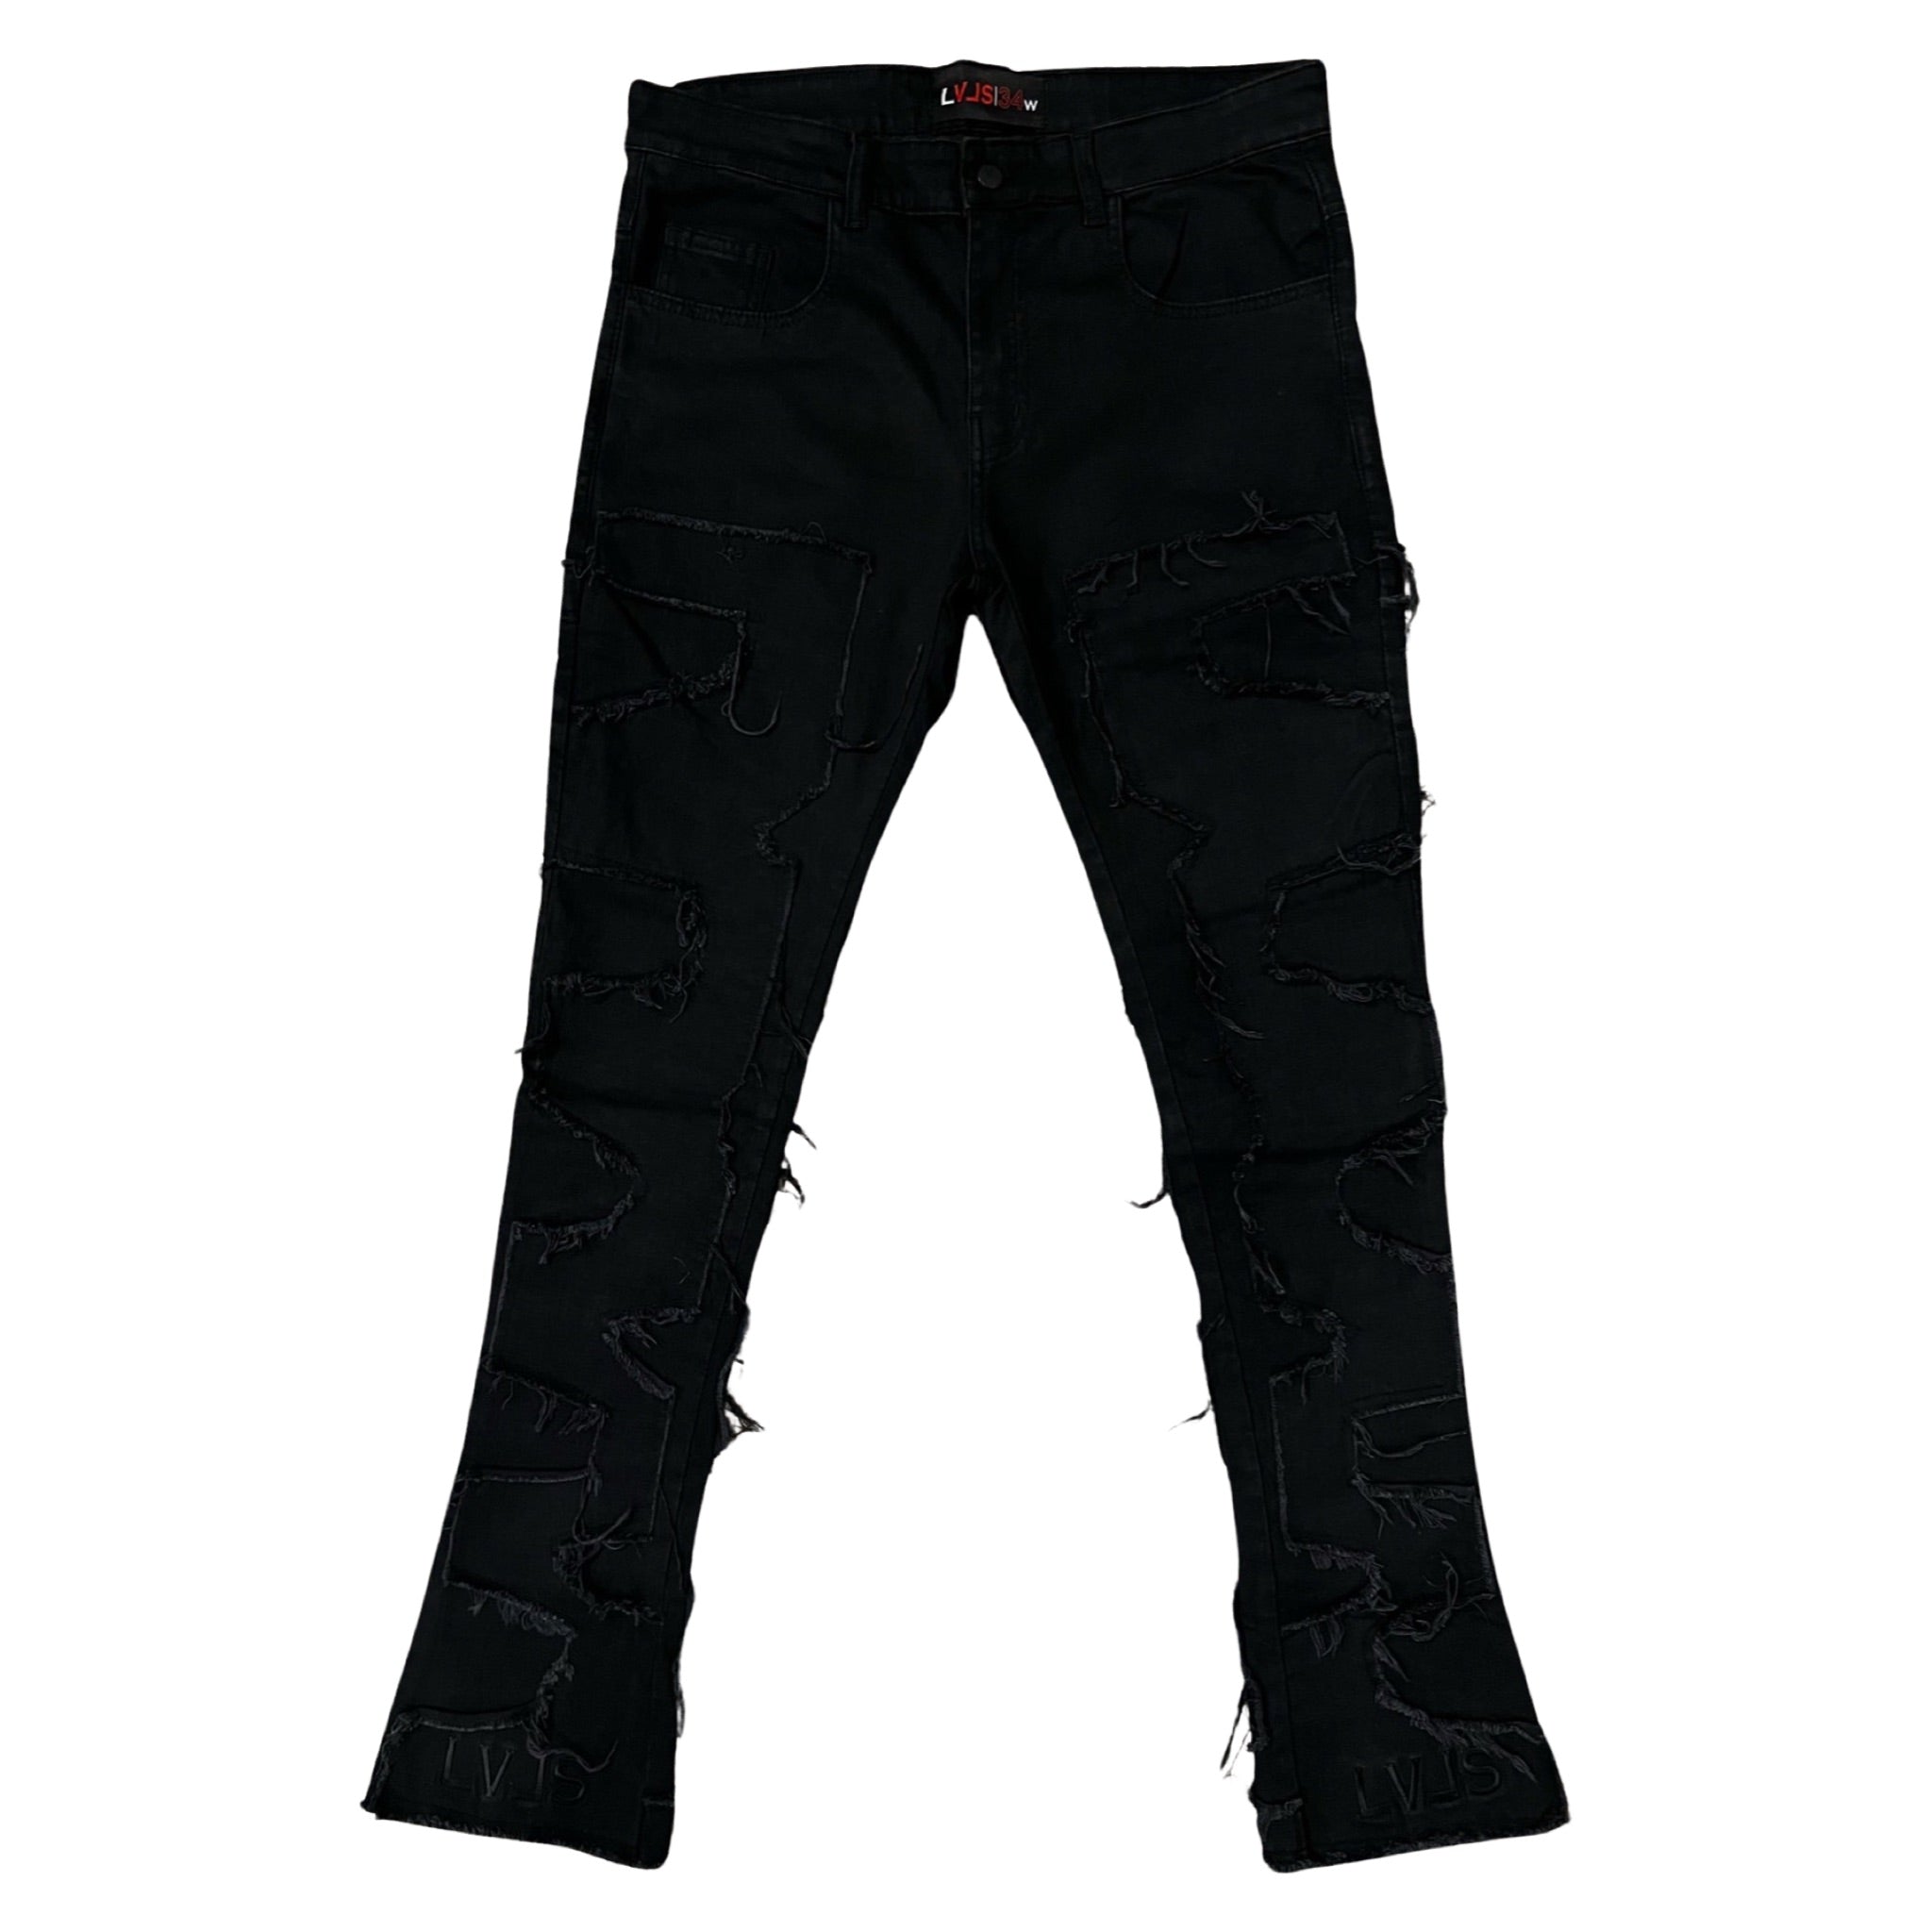 LEVELS, LLC Stack Jeans LEVELS RAGE SKINNY STACKED JEANS